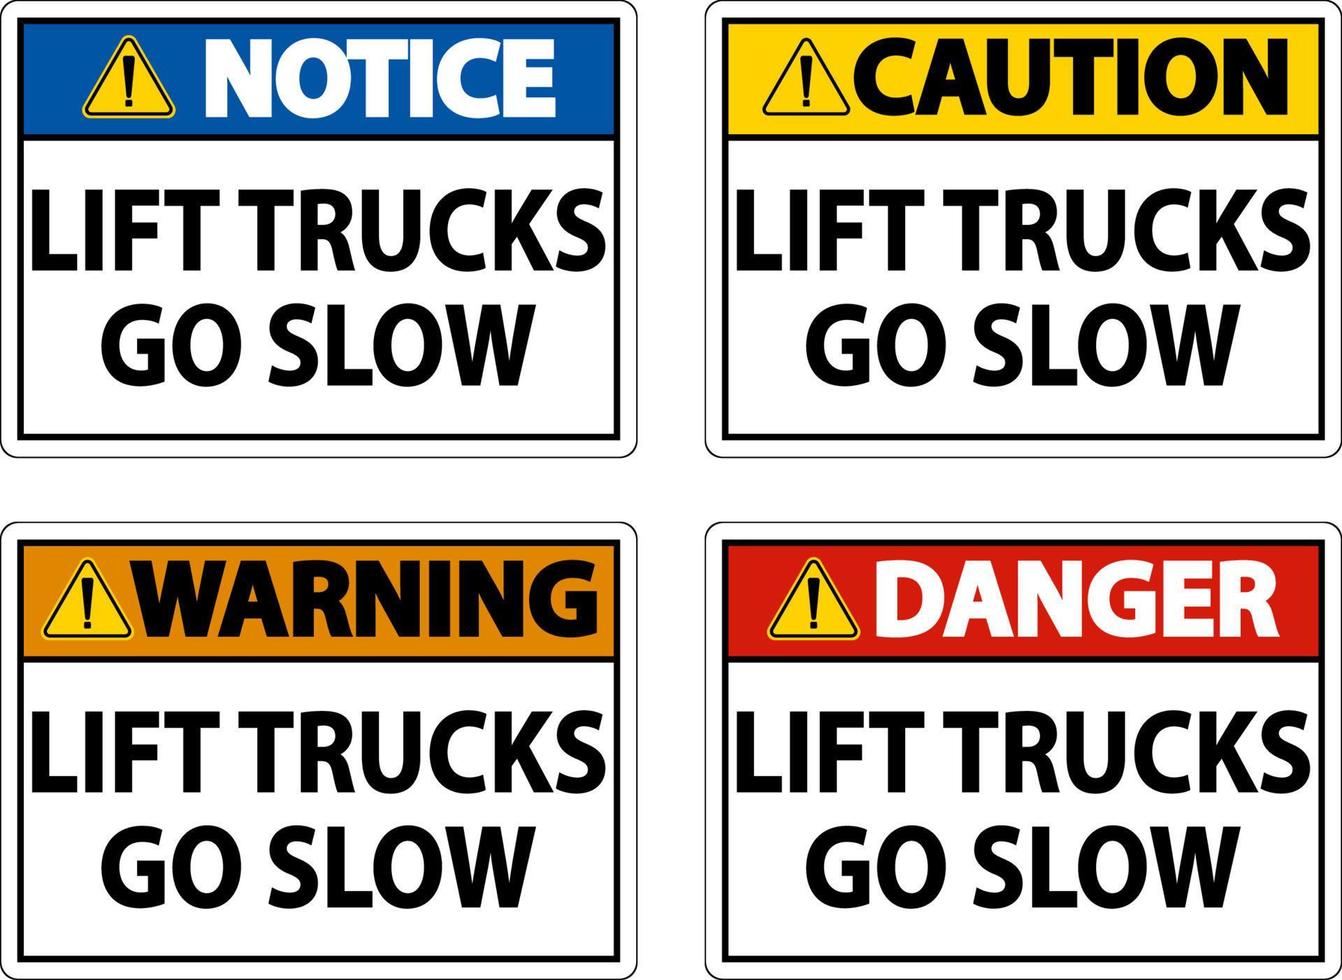 Caution Lift Trucks Go Slow Sign On White Background vector